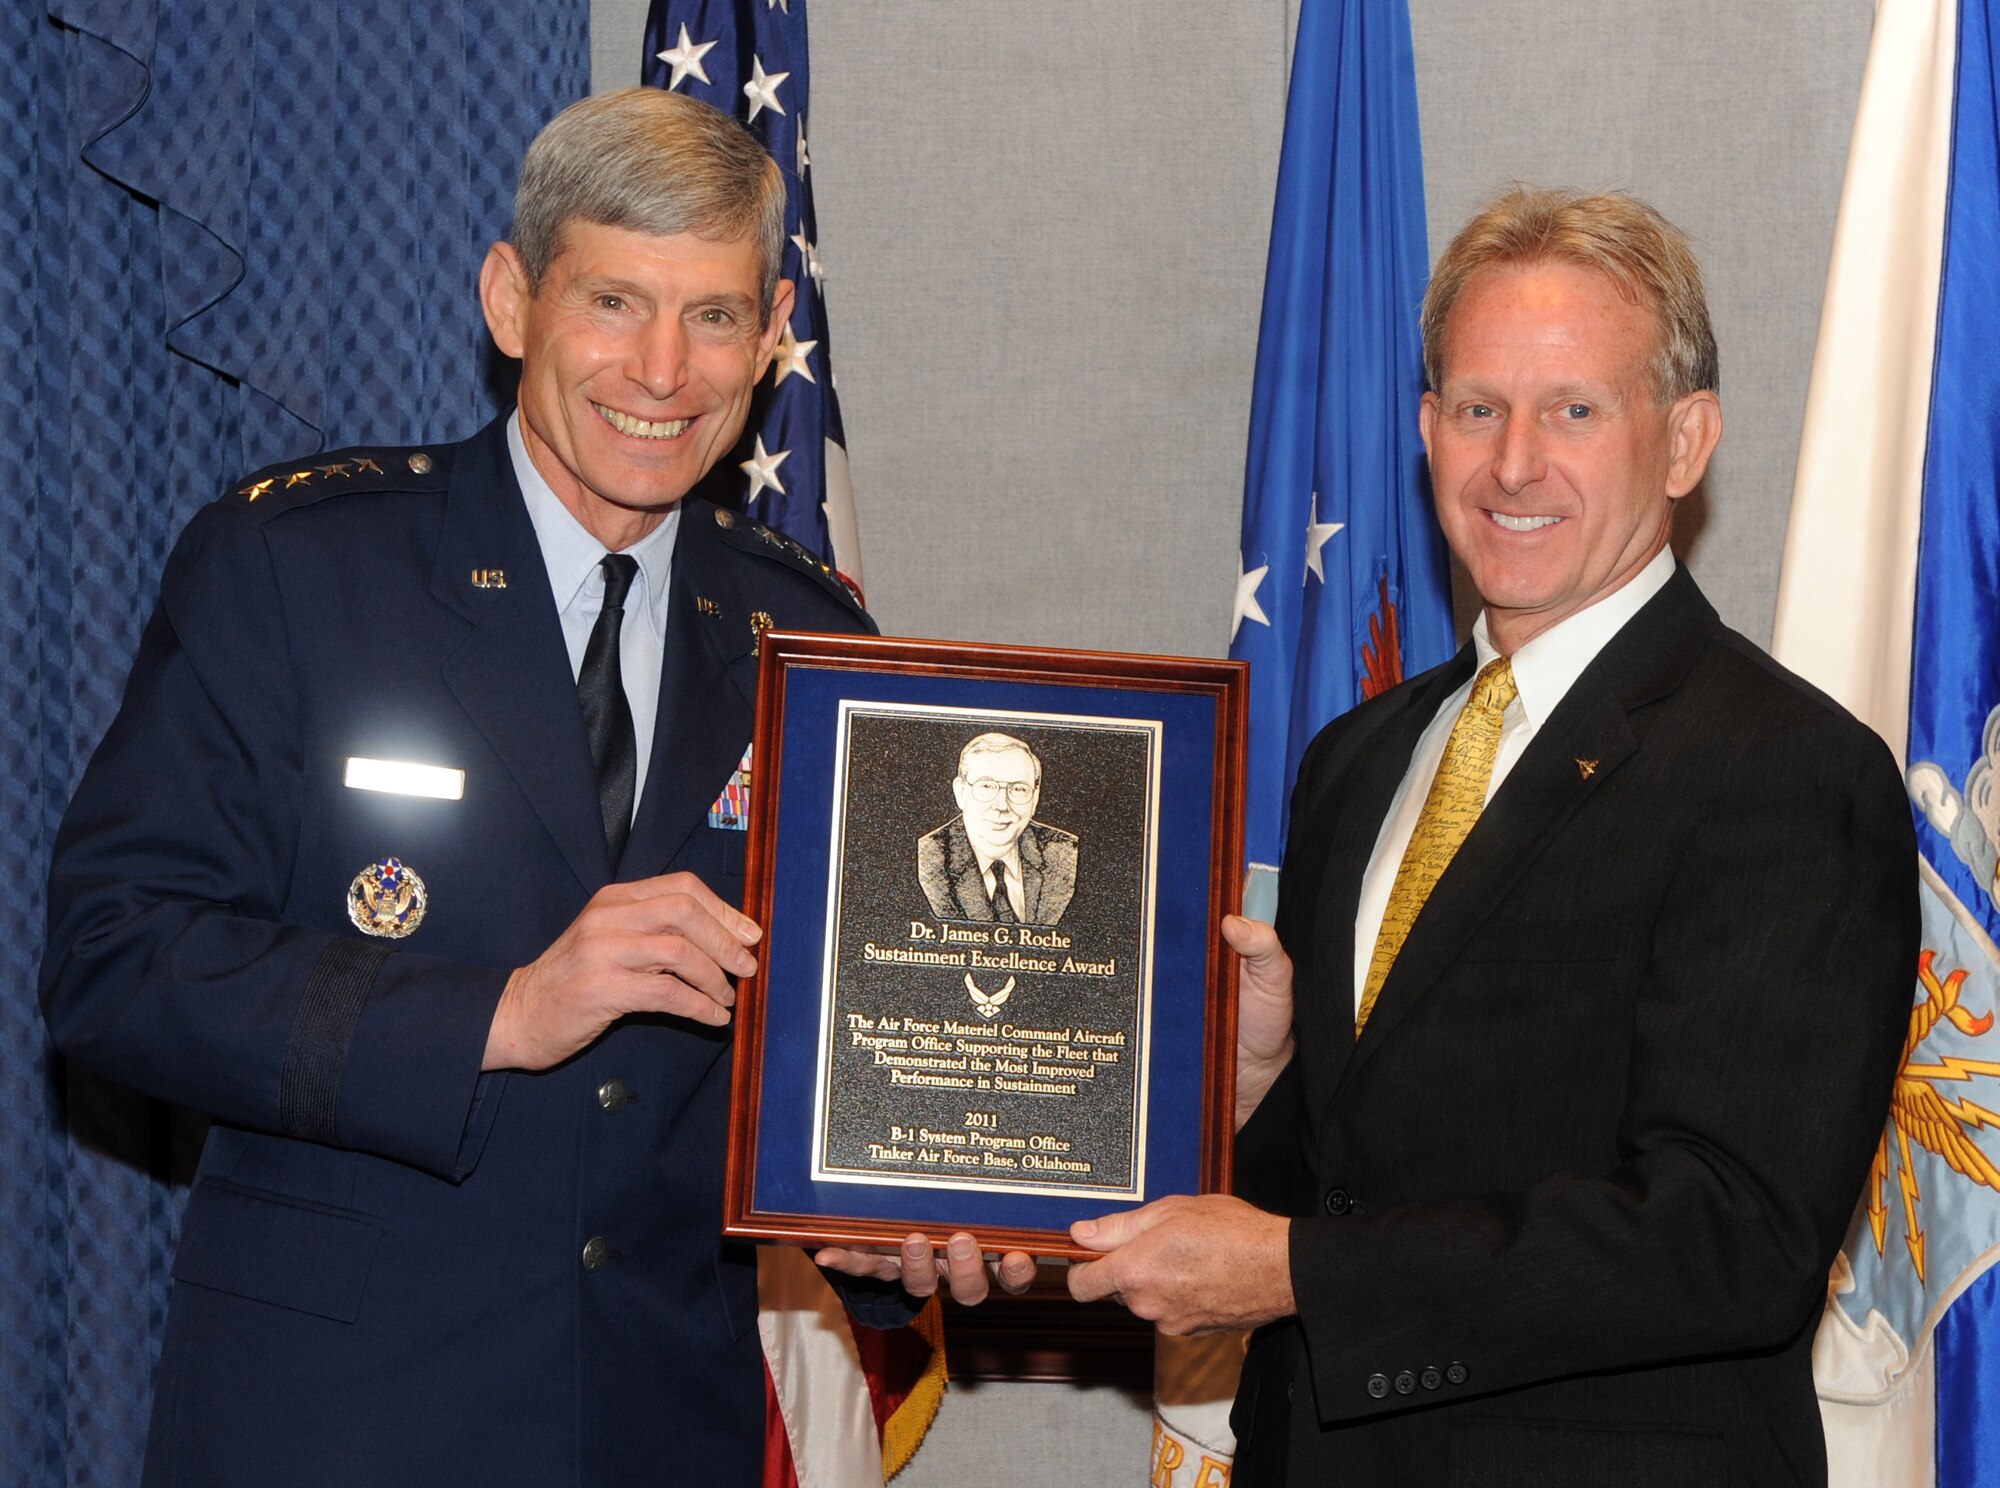 William Barnes, from Tinker Air Force Base, Okla., receives the Dr. James G. Roche Sustainment Excellence award from Air Force Chief of Staff Gen. Norton Schwartz during a Pentagon ceremony May 9, 2012.  Barnes is the deputy chief, B-1 systems program office at Tinker. (Air Force photo by Andy Morataya)